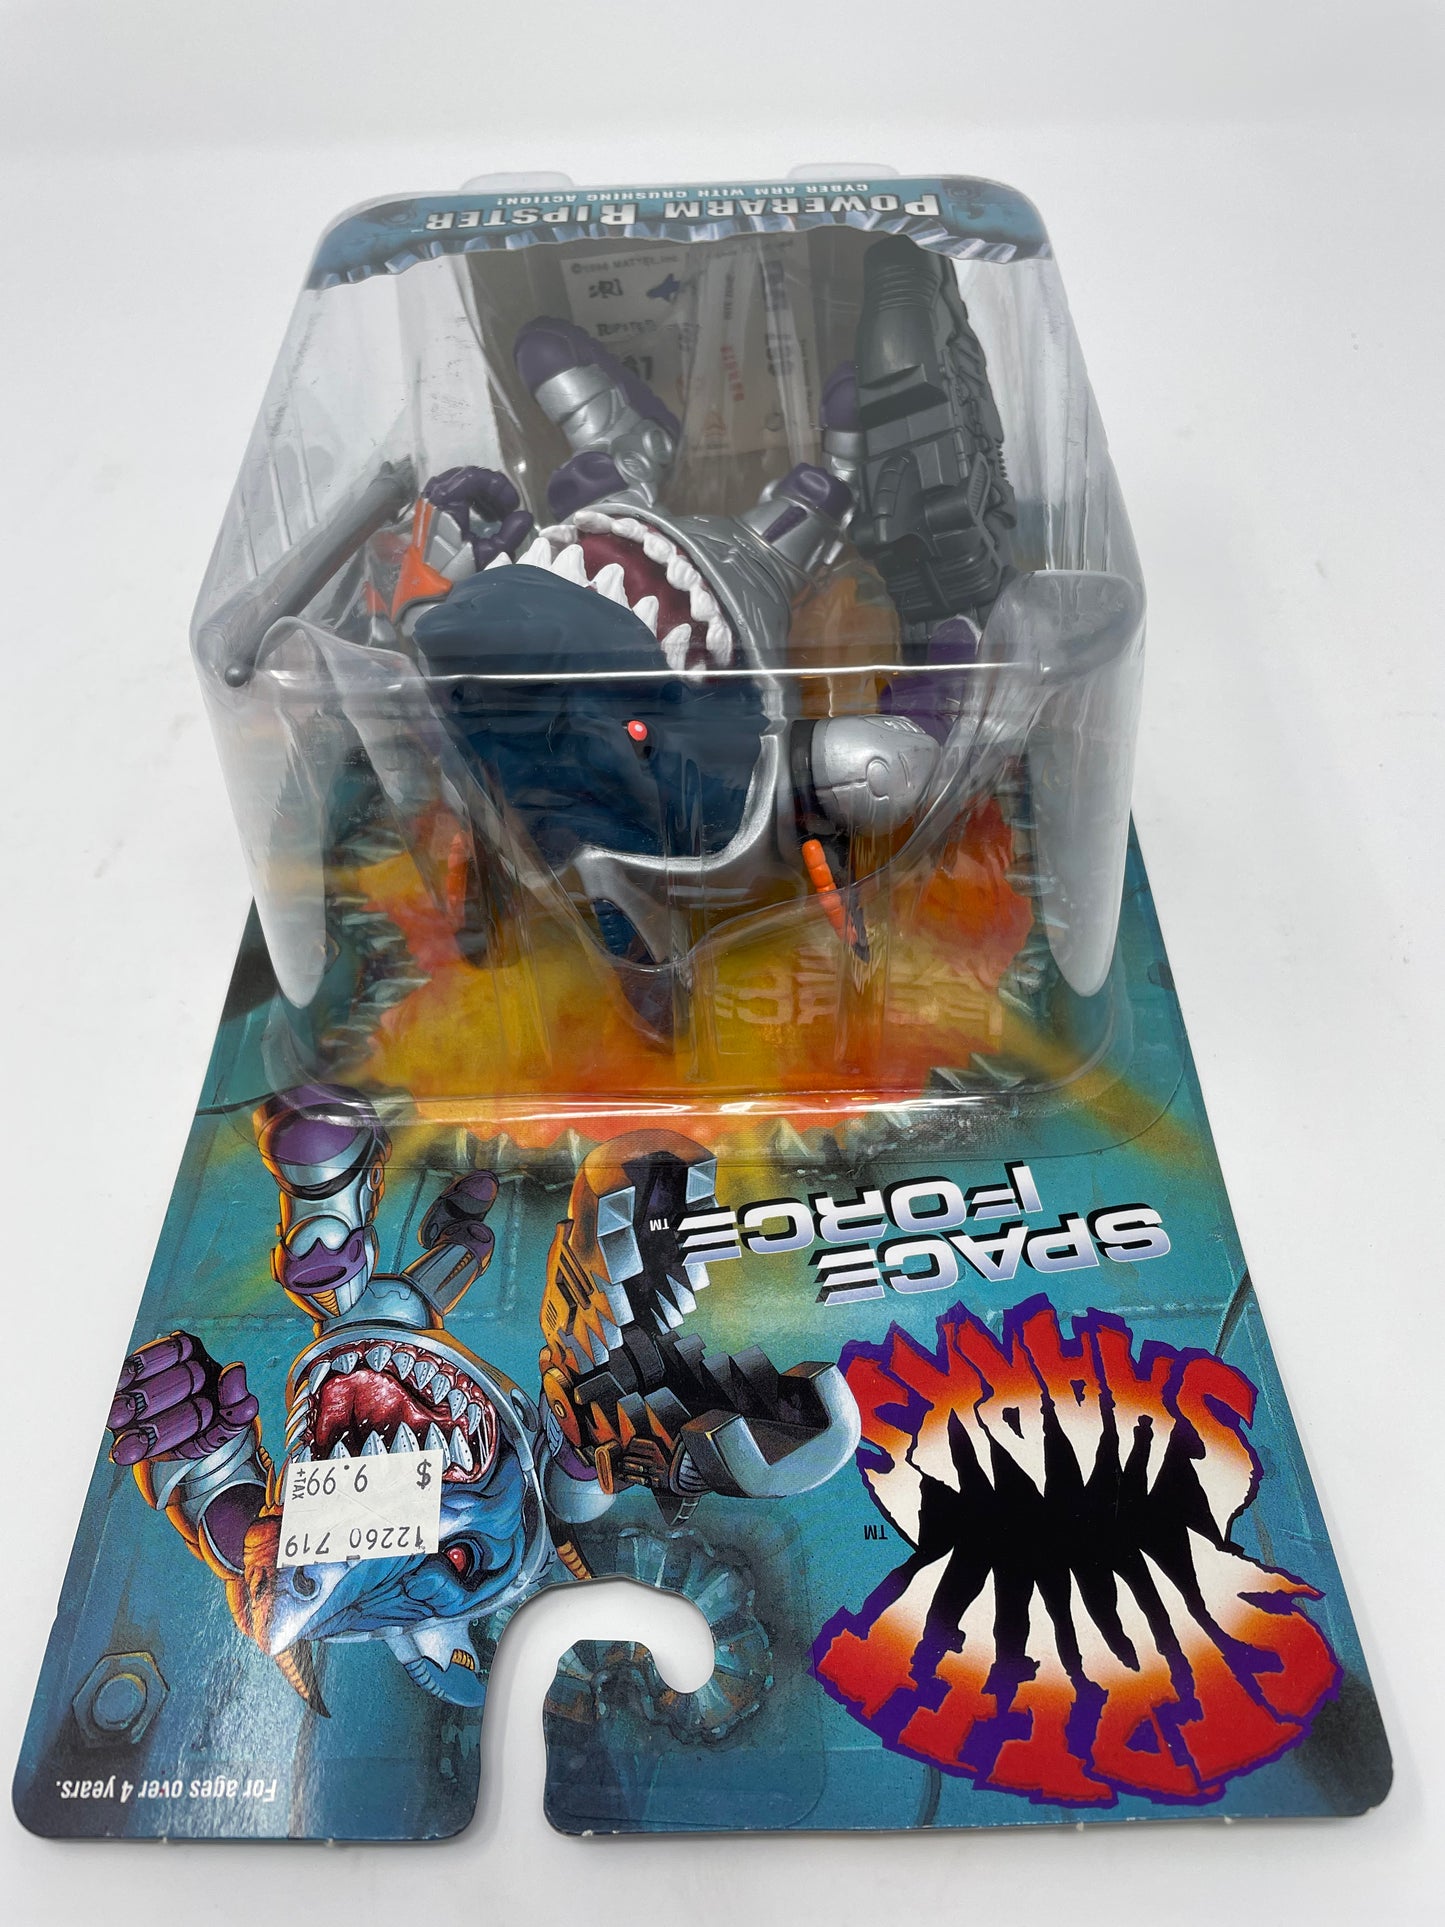 PowerArm Ripster - Street Sharks Space Force (6 of 6)